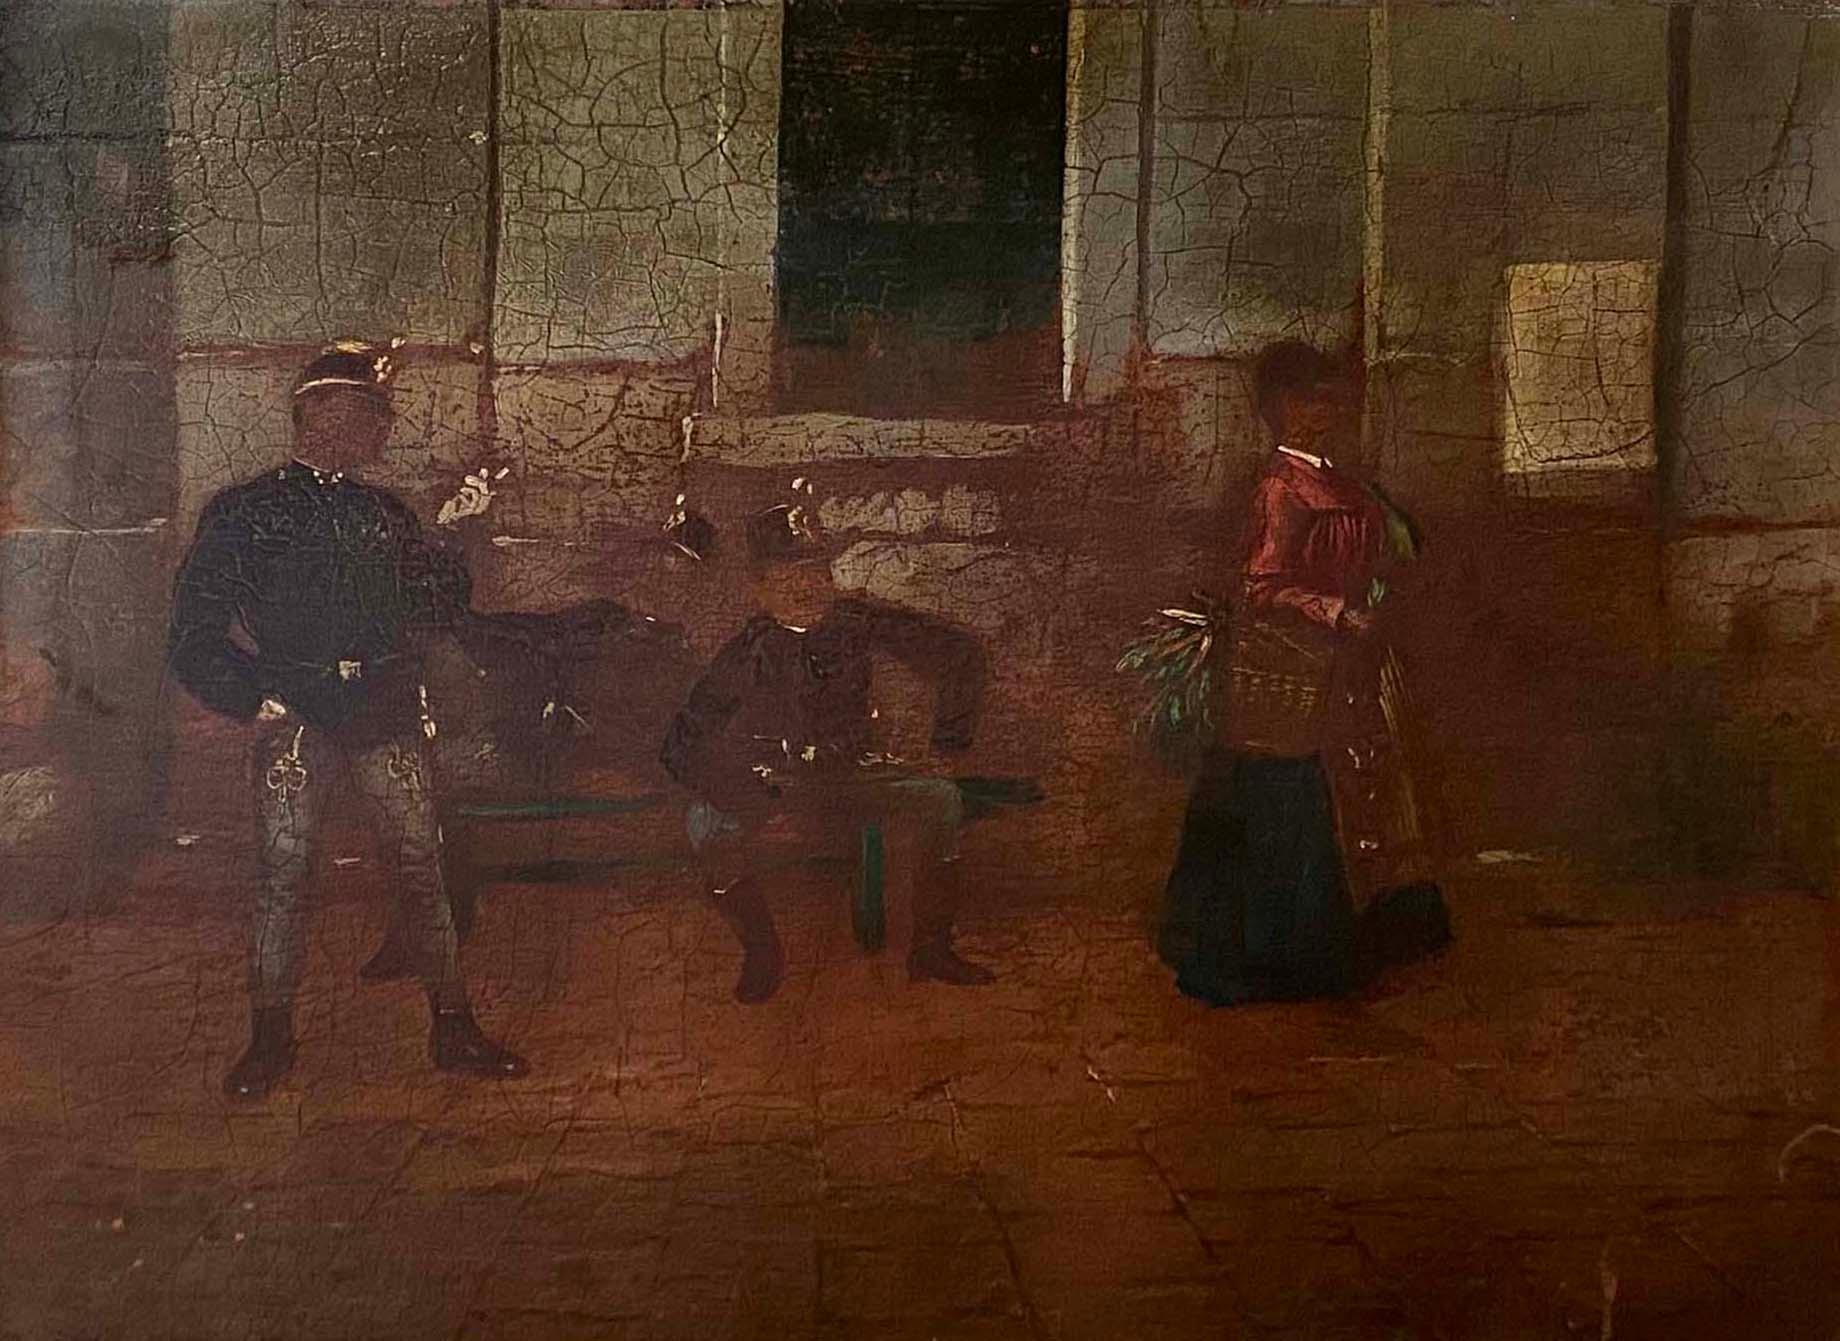 Antique oil painting of soldiers and woman on the street. Oil on board. Framed.